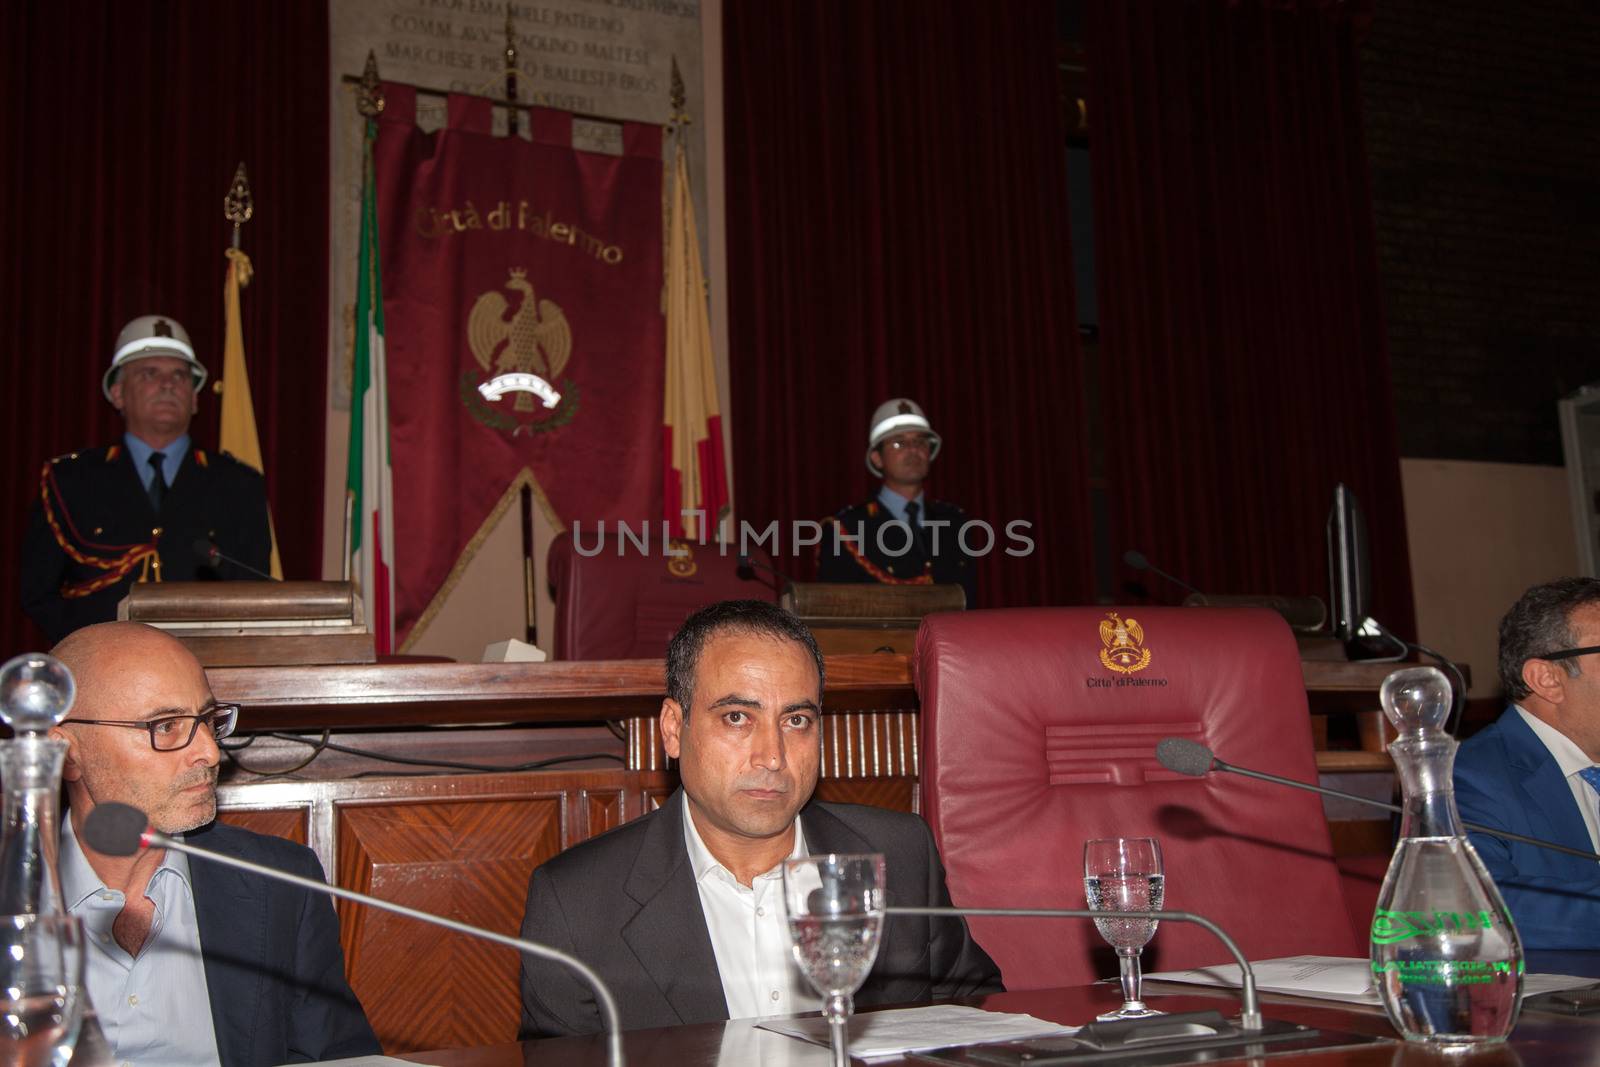 ITALY, Palermo: Doctors Without Borders cultural mediator Ahmad Al Rousan receives an honorary citizenship from Palermo Mayor Leoluca Orlando on September 16, 2015. 